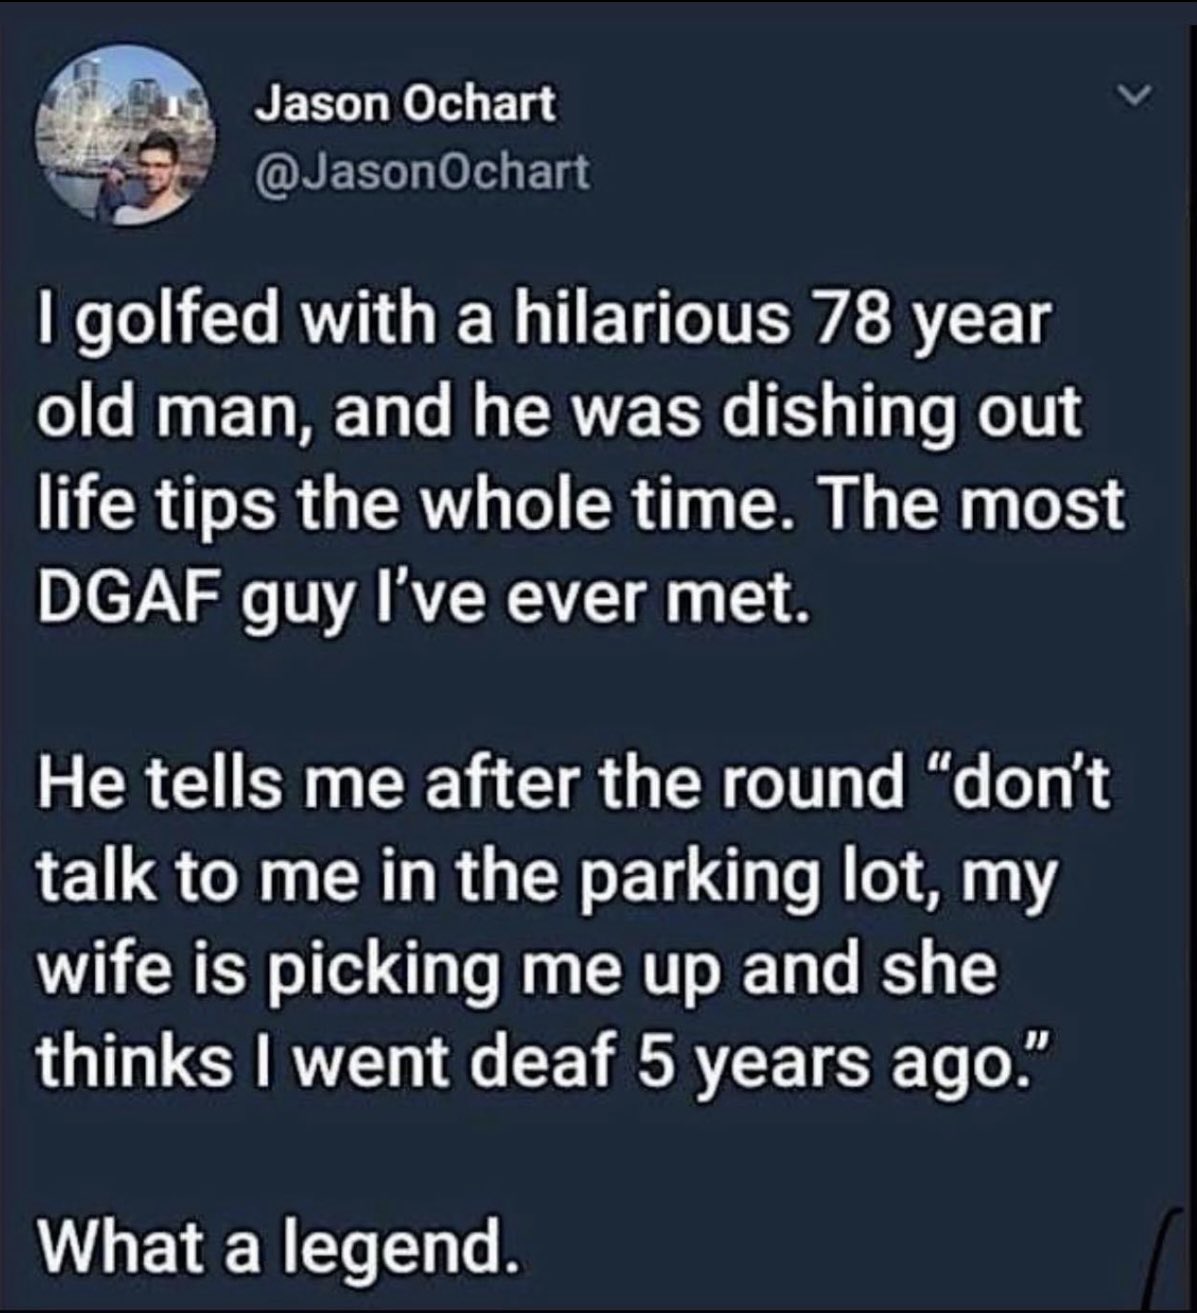 dudes posting their Ws - material - Jason Ochart I golfed with a hilarious 78 year old man, and he was dishing out life tips the whole time. The most Dgaf guy I've ever met. He tells me after the round